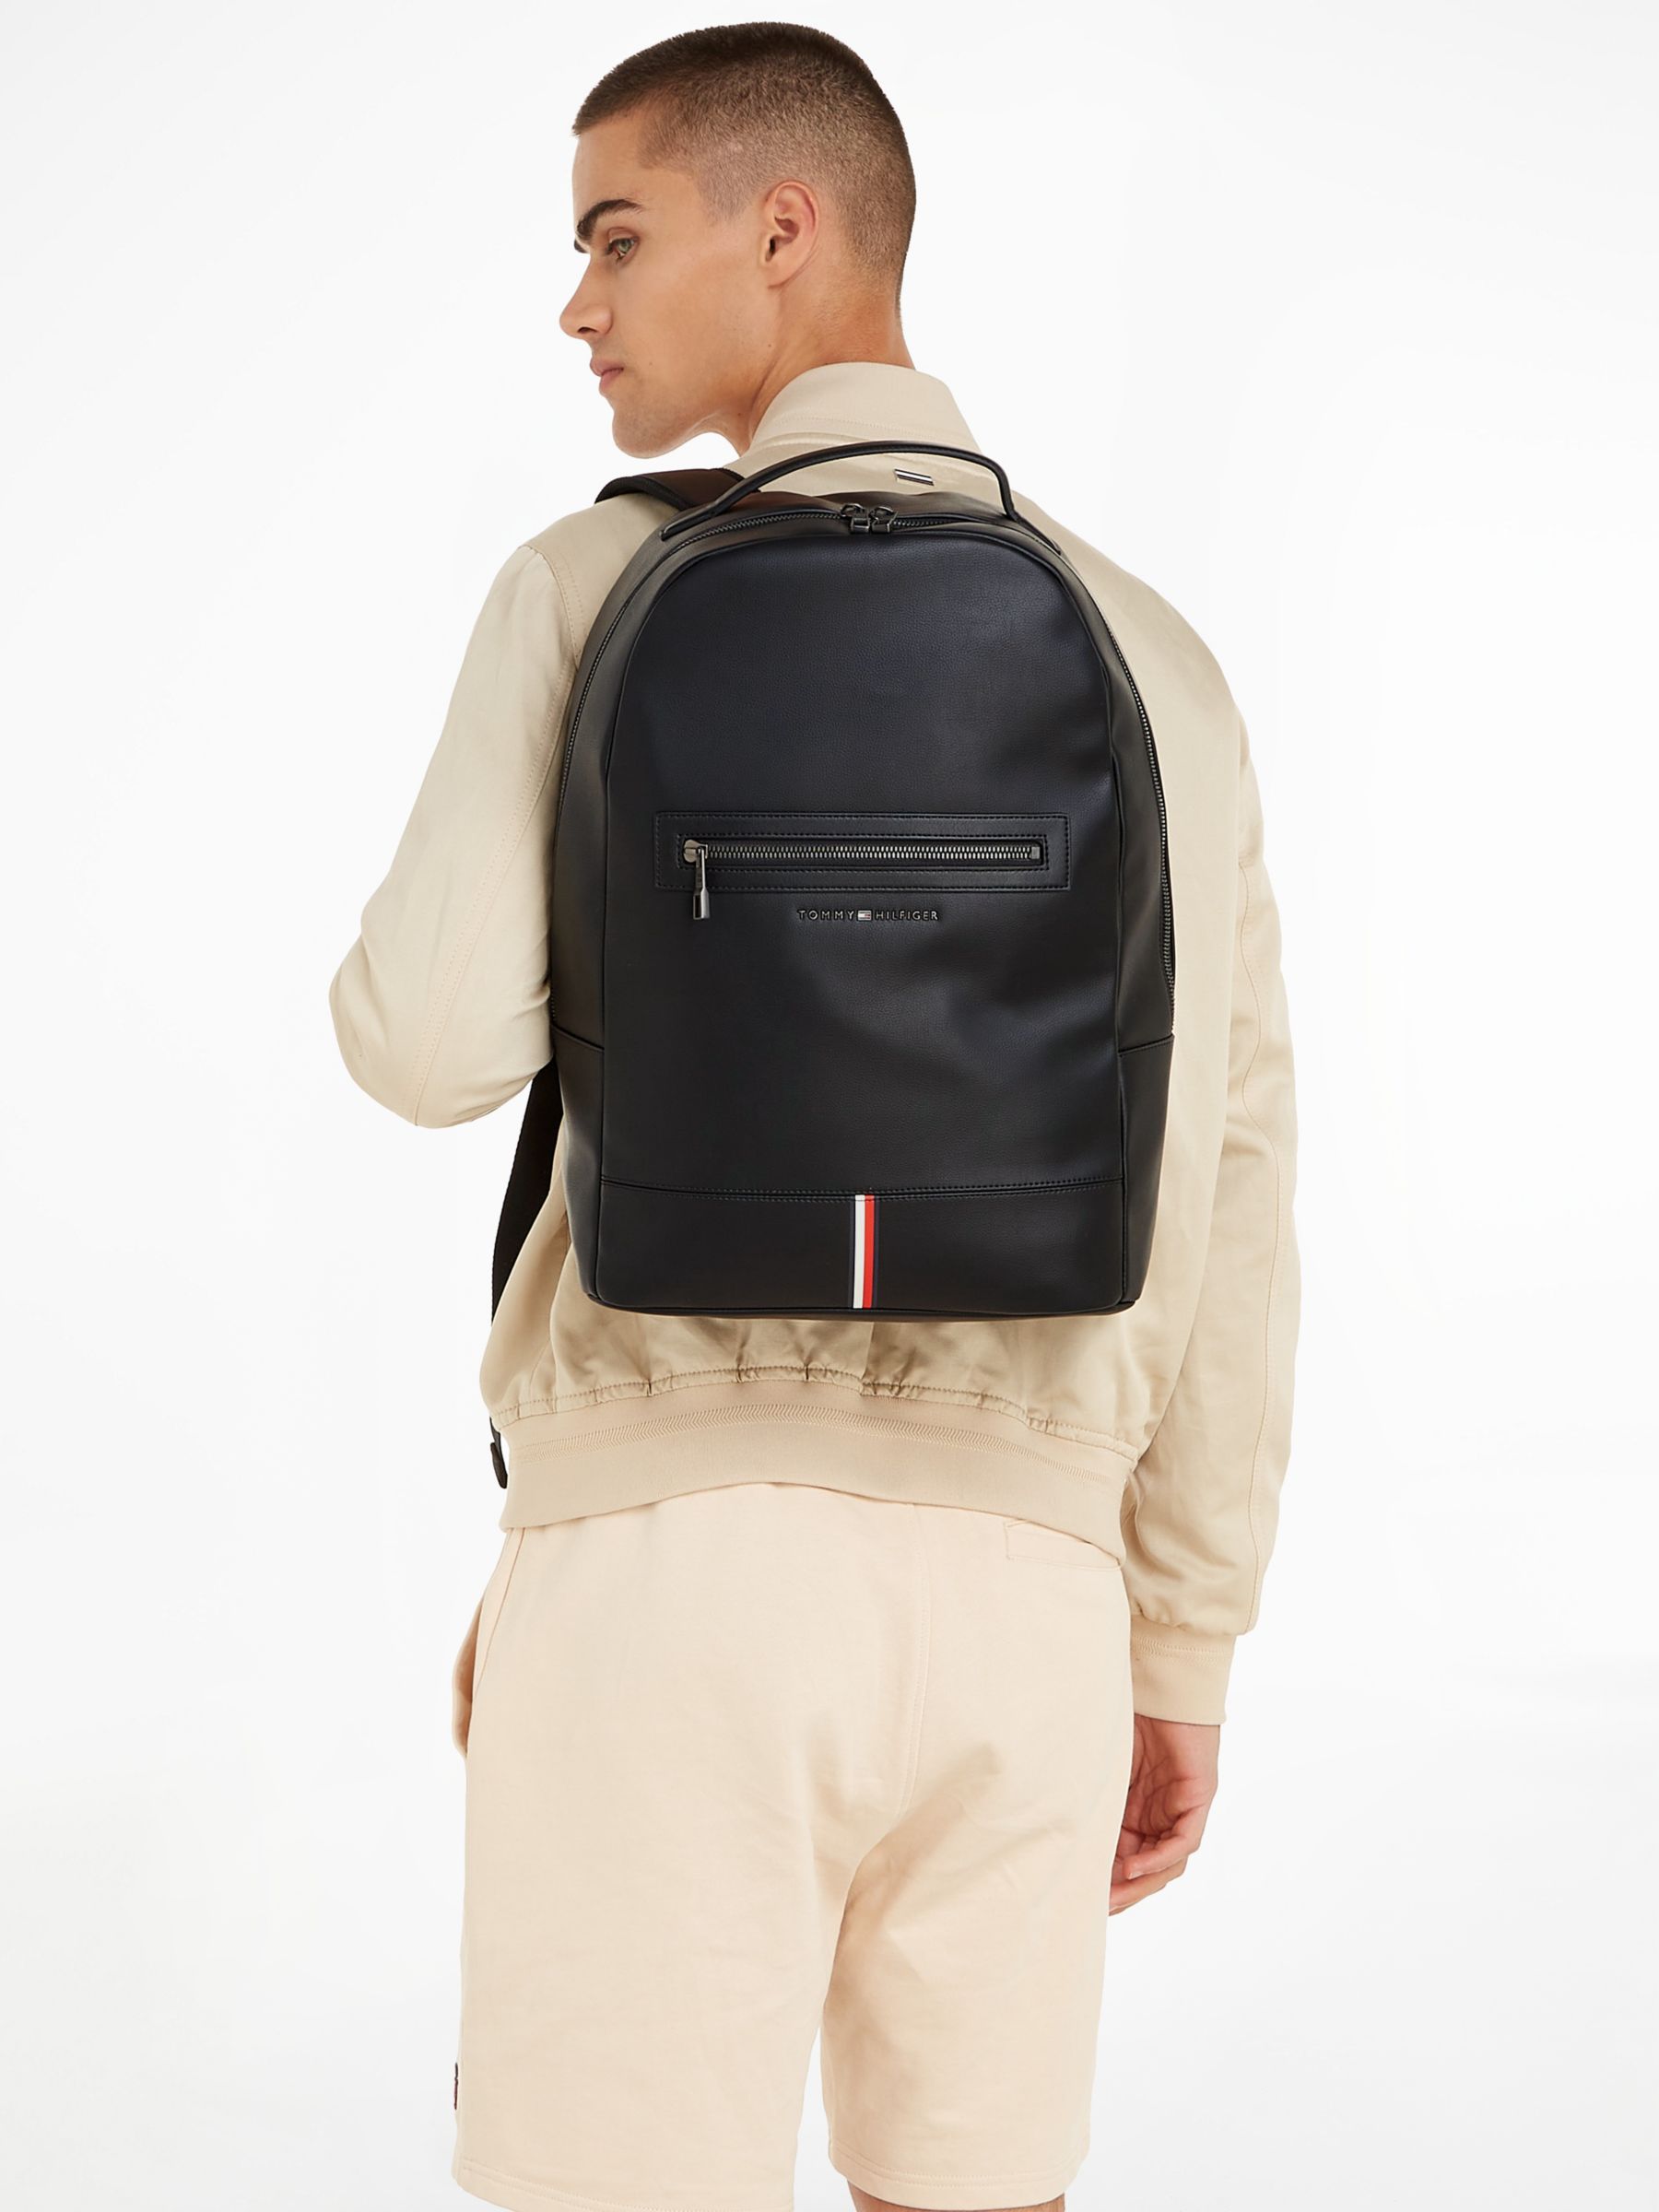 Corporate Backpack, Black, One Size